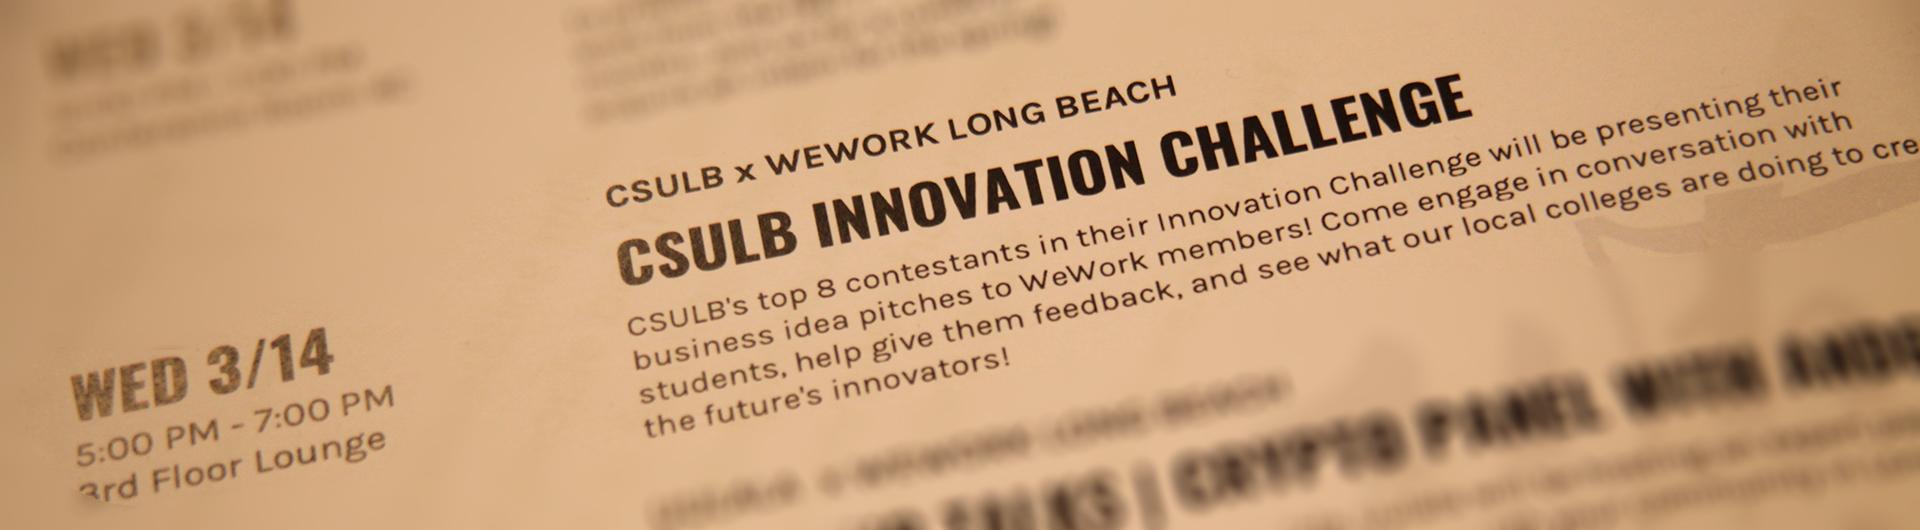 CSULB Innovation Challenge Description - it says CSULB top 8 contestants in their Innovation Challenge will be presenting their business idea pitches to WeWork members!  Come engage in conversation in students, help give them feedback, and see what our lo